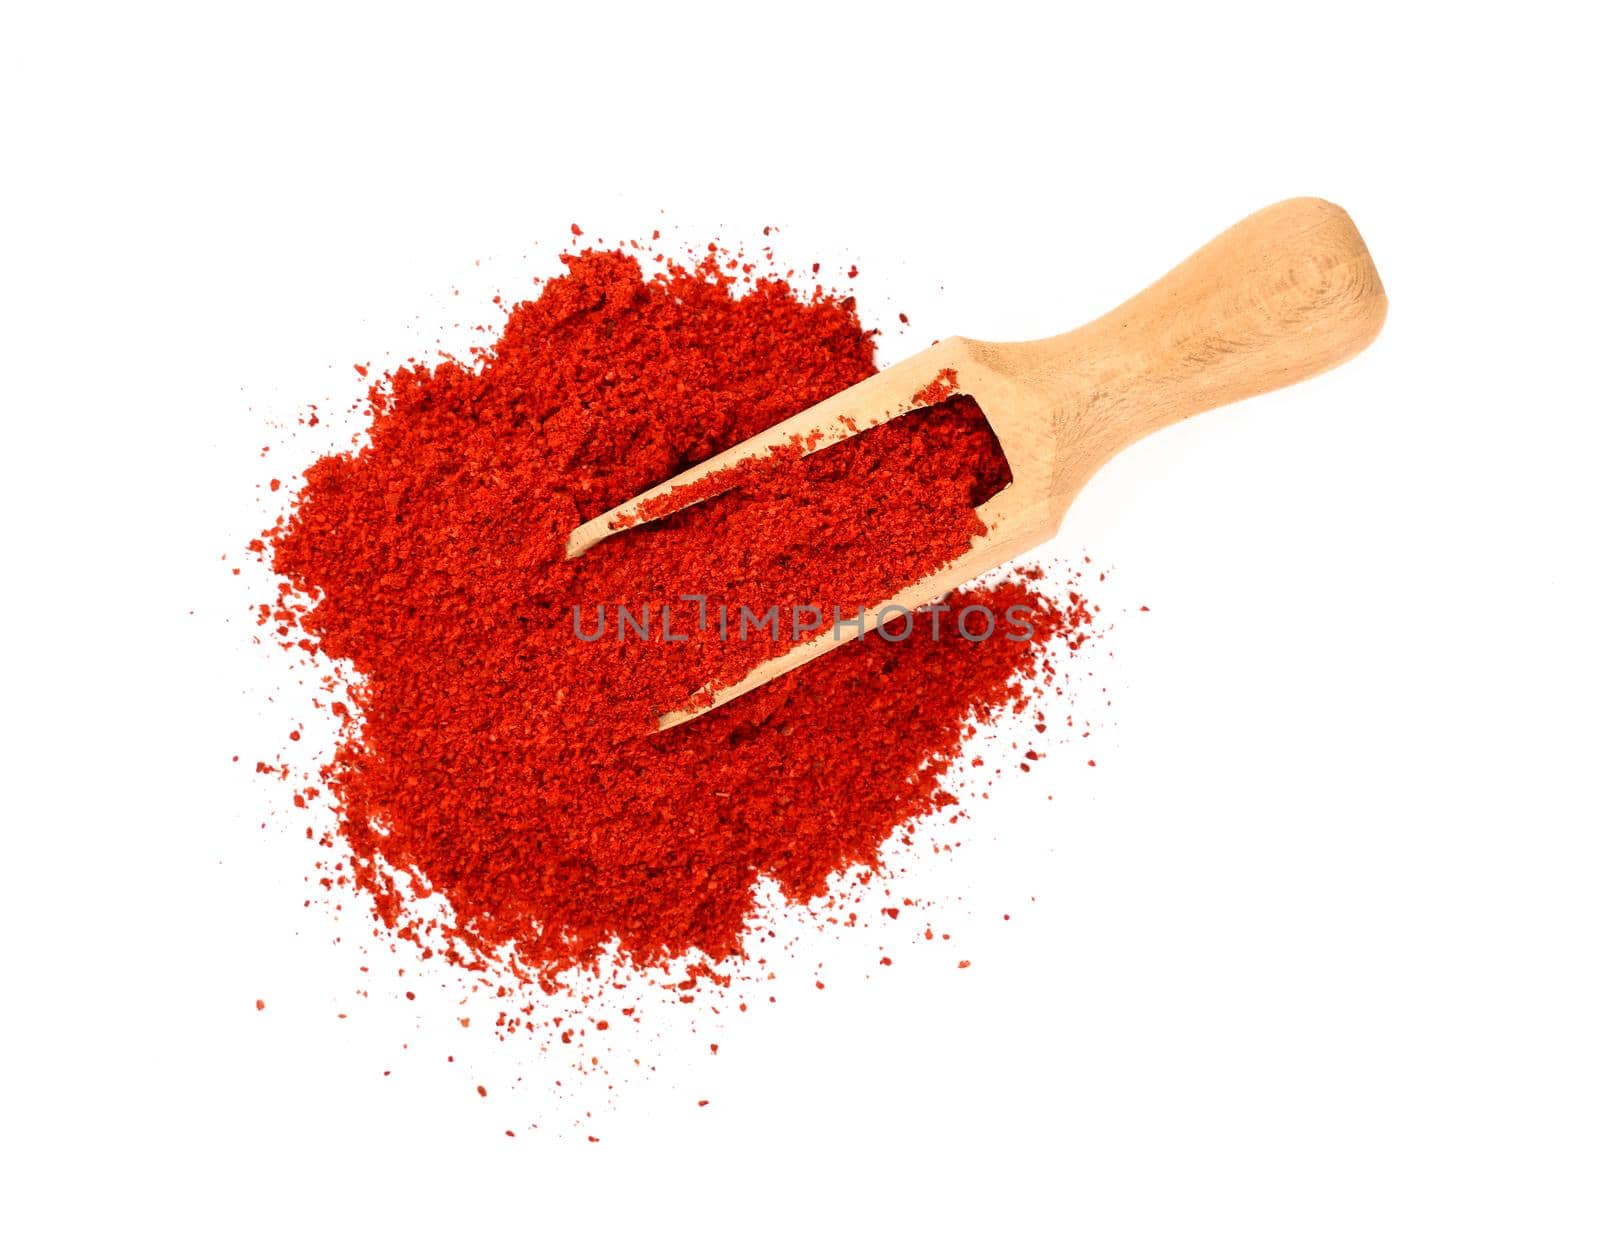 Wooden scoop full of red hot chili pepper by BreakingTheWalls